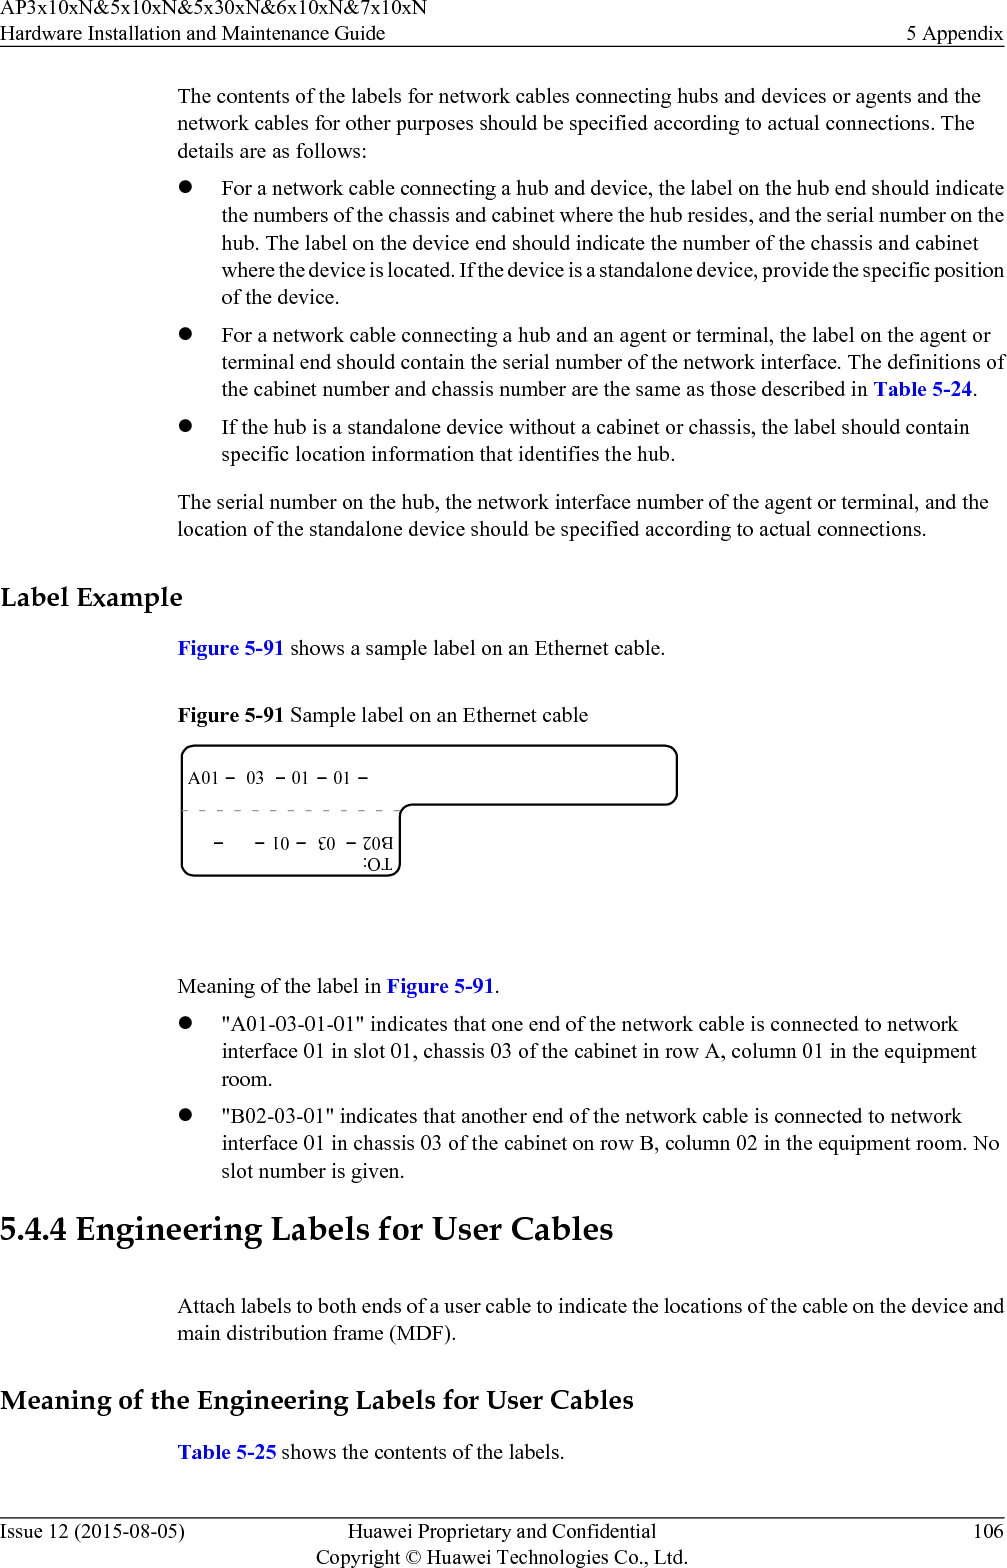 The contents of the labels for network cables connecting hubs and devices or agents and thenetwork cables for other purposes should be specified according to actual connections. Thedetails are as follows:lFor a network cable connecting a hub and device, the label on the hub end should indicatethe numbers of the chassis and cabinet where the hub resides, and the serial number on thehub. The label on the device end should indicate the number of the chassis and cabinetwhere the device is located. If the device is a standalone device, provide the specific positionof the device.lFor a network cable connecting a hub and an agent or terminal, the label on the agent orterminal end should contain the serial number of the network interface. The definitions ofthe cabinet number and chassis number are the same as those described in Table 5-24.lIf the hub is a standalone device without a cabinet or chassis, the label should containspecific location information that identifies the hub.The serial number on the hub, the network interface number of the agent or terminal, and thelocation of the standalone device should be specified according to actual connections.Label ExampleFigure 5-91 shows a sample label on an Ethernet cable.Figure 5-91 Sample label on an Ethernet cableA01TO:03 01 01B02 03 01 Meaning of the label in Figure 5-91.l&quot;A01-03-01-01&quot; indicates that one end of the network cable is connected to networkinterface 01 in slot 01, chassis 03 of the cabinet in row A, column 01 in the equipmentroom.l&quot;B02-03-01&quot; indicates that another end of the network cable is connected to networkinterface 01 in chassis 03 of the cabinet on row B, column 02 in the equipment room. Noslot number is given.5.4.4 Engineering Labels for User CablesAttach labels to both ends of a user cable to indicate the locations of the cable on the device andmain distribution frame (MDF).Meaning of the Engineering Labels for User CablesTable 5-25 shows the contents of the labels.AP3x10xN&amp;5x10xN&amp;5x30xN&amp;6x10xN&amp;7x10xNHardware Installation and Maintenance Guide 5 AppendixIssue 12 (2015-08-05) Huawei Proprietary and ConfidentialCopyright © Huawei Technologies Co., Ltd.106